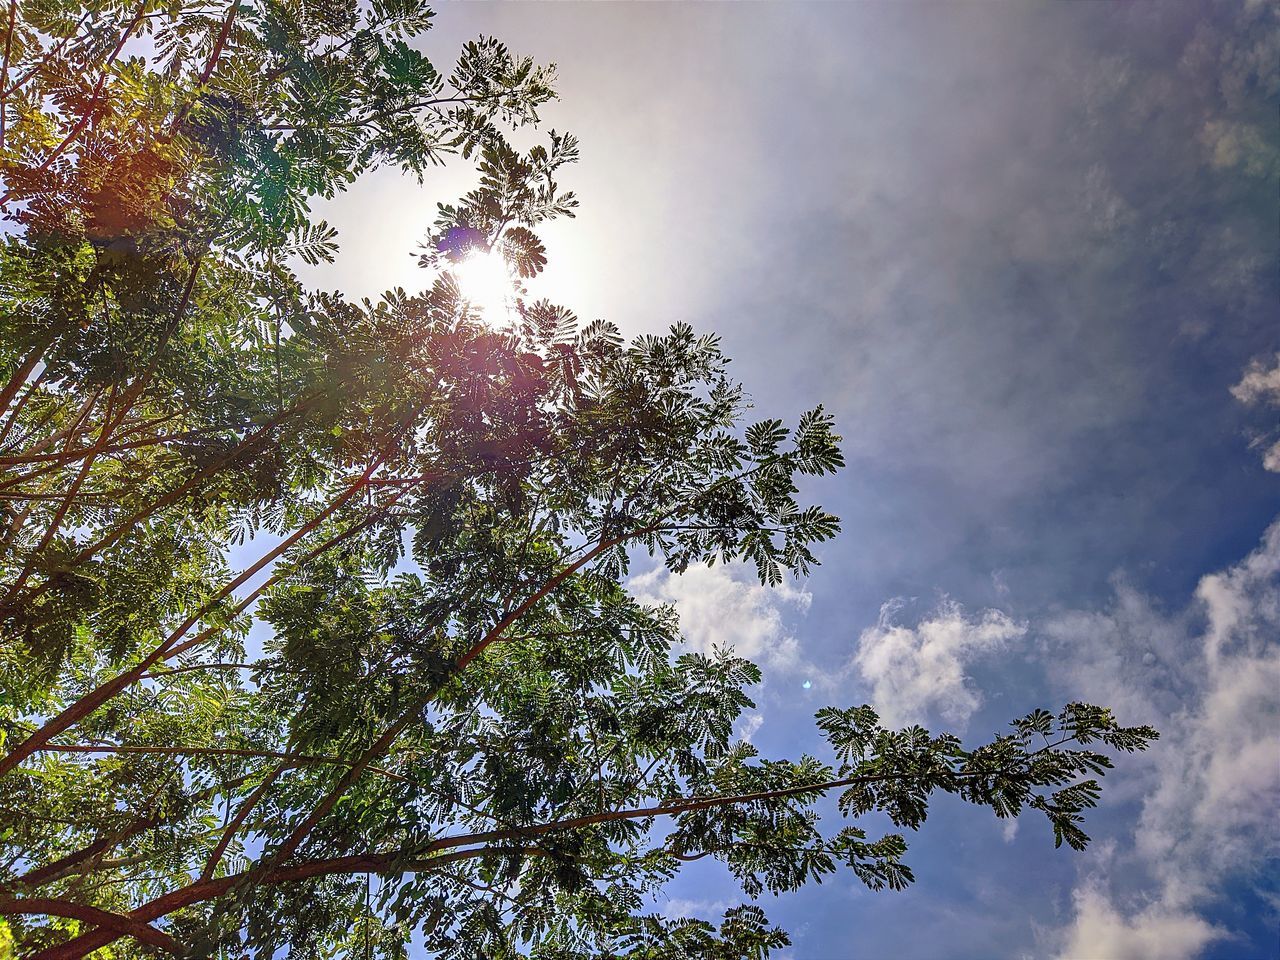 tree, plant, sky, nature, sunlight, cloud, low angle view, leaf, beauty in nature, branch, flower, growth, tranquility, no people, outdoors, sunbeam, environment, day, scenics - nature, sun, autumn, forest, plant part, pinaceae, coniferous tree, back lit, land